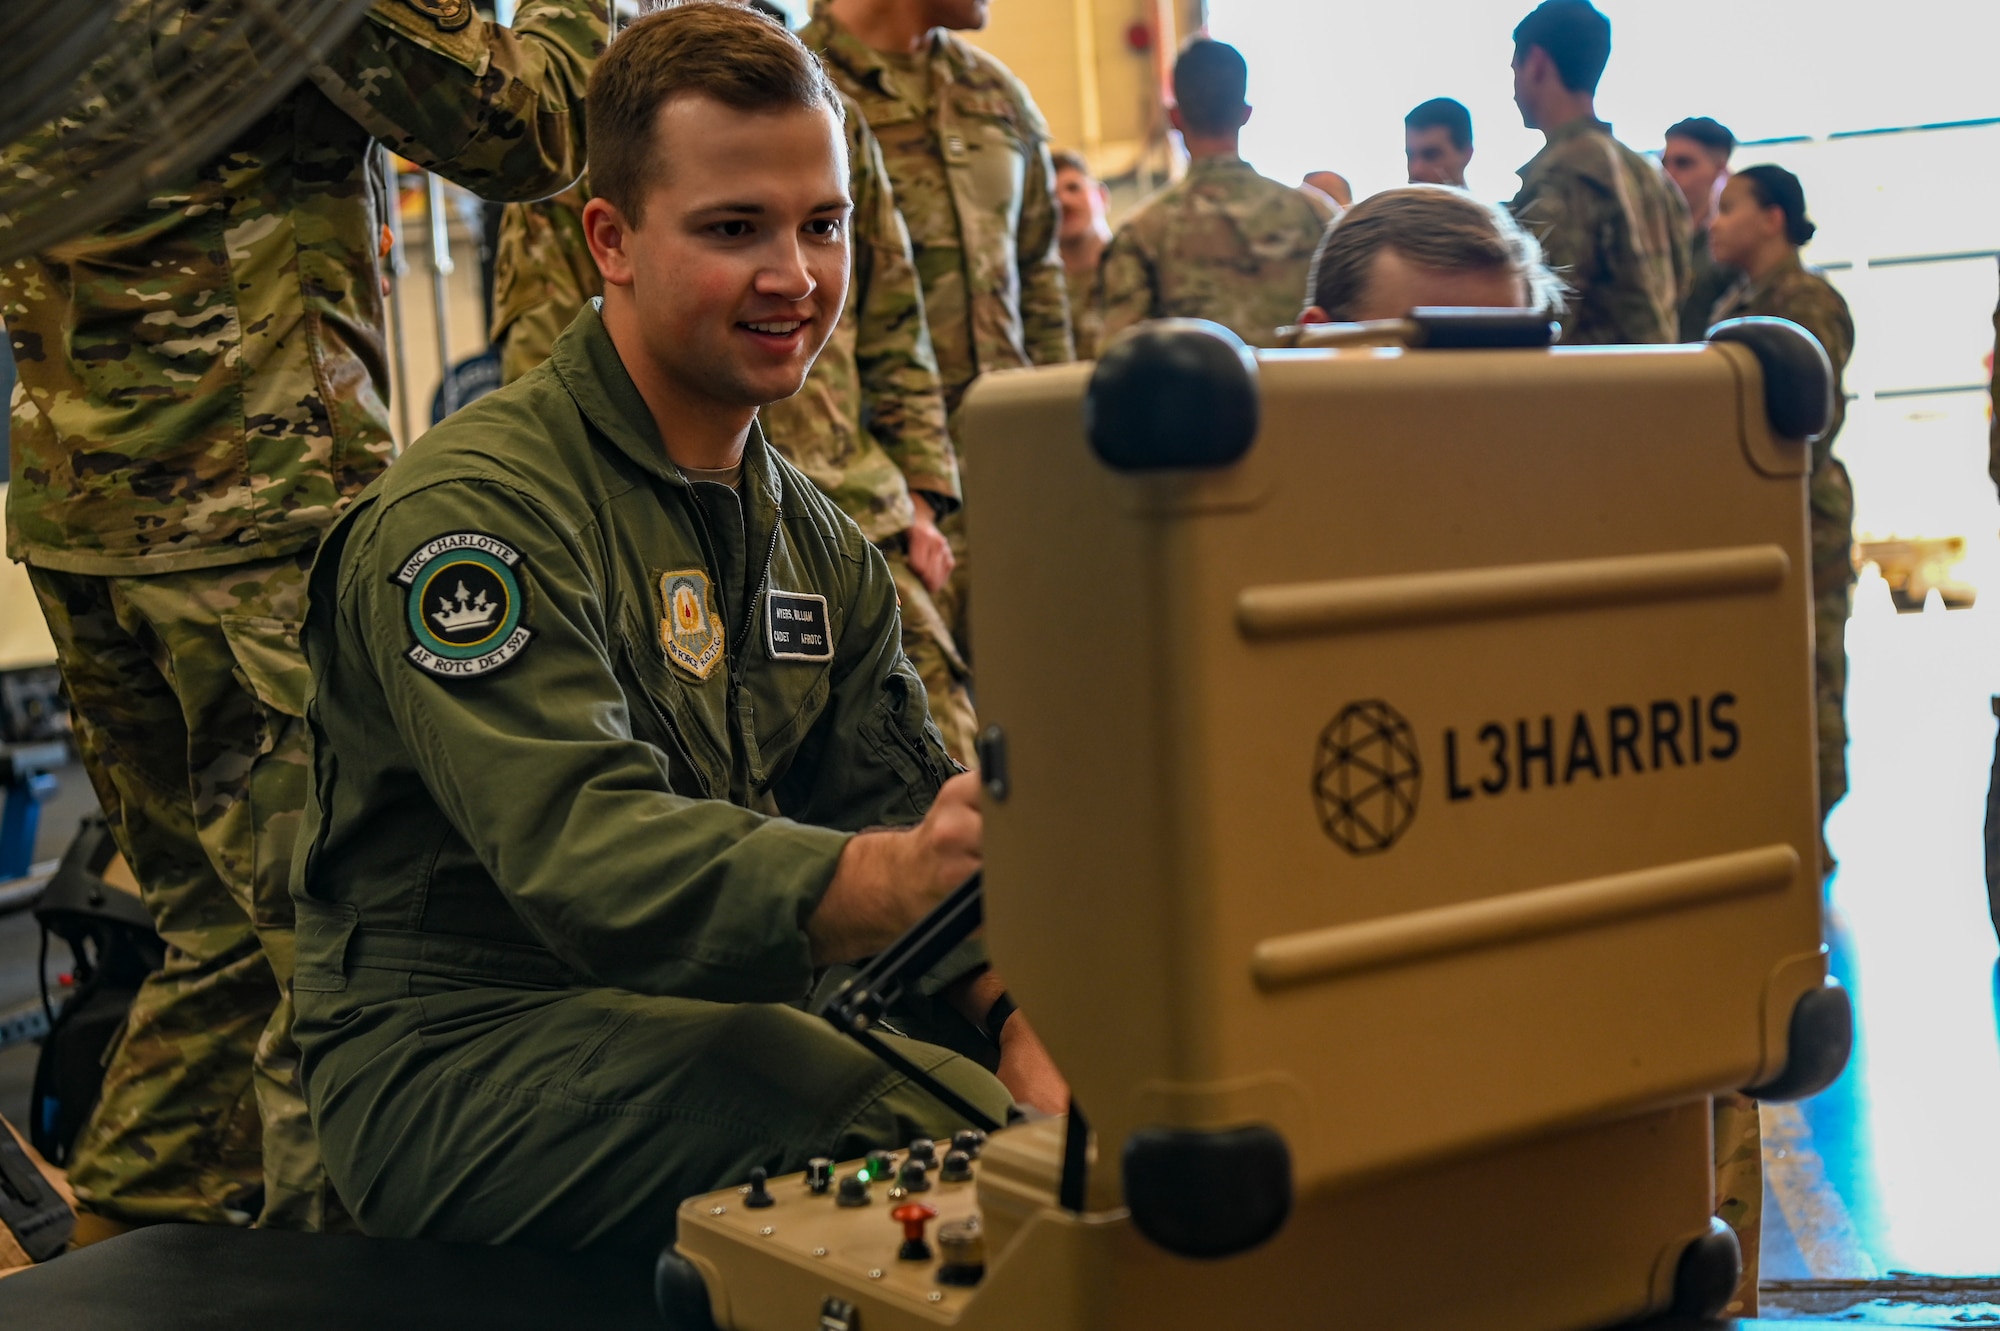 Will Myers, University of North Carolina Charlotte Air Force ROTC cadet, controls an Explosive Ordnance Disposal robot during Project Tuskegee 2.0 at Dyess Air Force Base, Texas, Aug. 1, 2023. The project is intended to increase the cadets' understanding of Air Force and Space Force missions and day-to-day operations. The 19 cadets in attendance represent 19 different Air Force ROTC detachments across the enterprise's four regions. (U.S. Air Force photo by Airman 1st Class Emma Anderson)